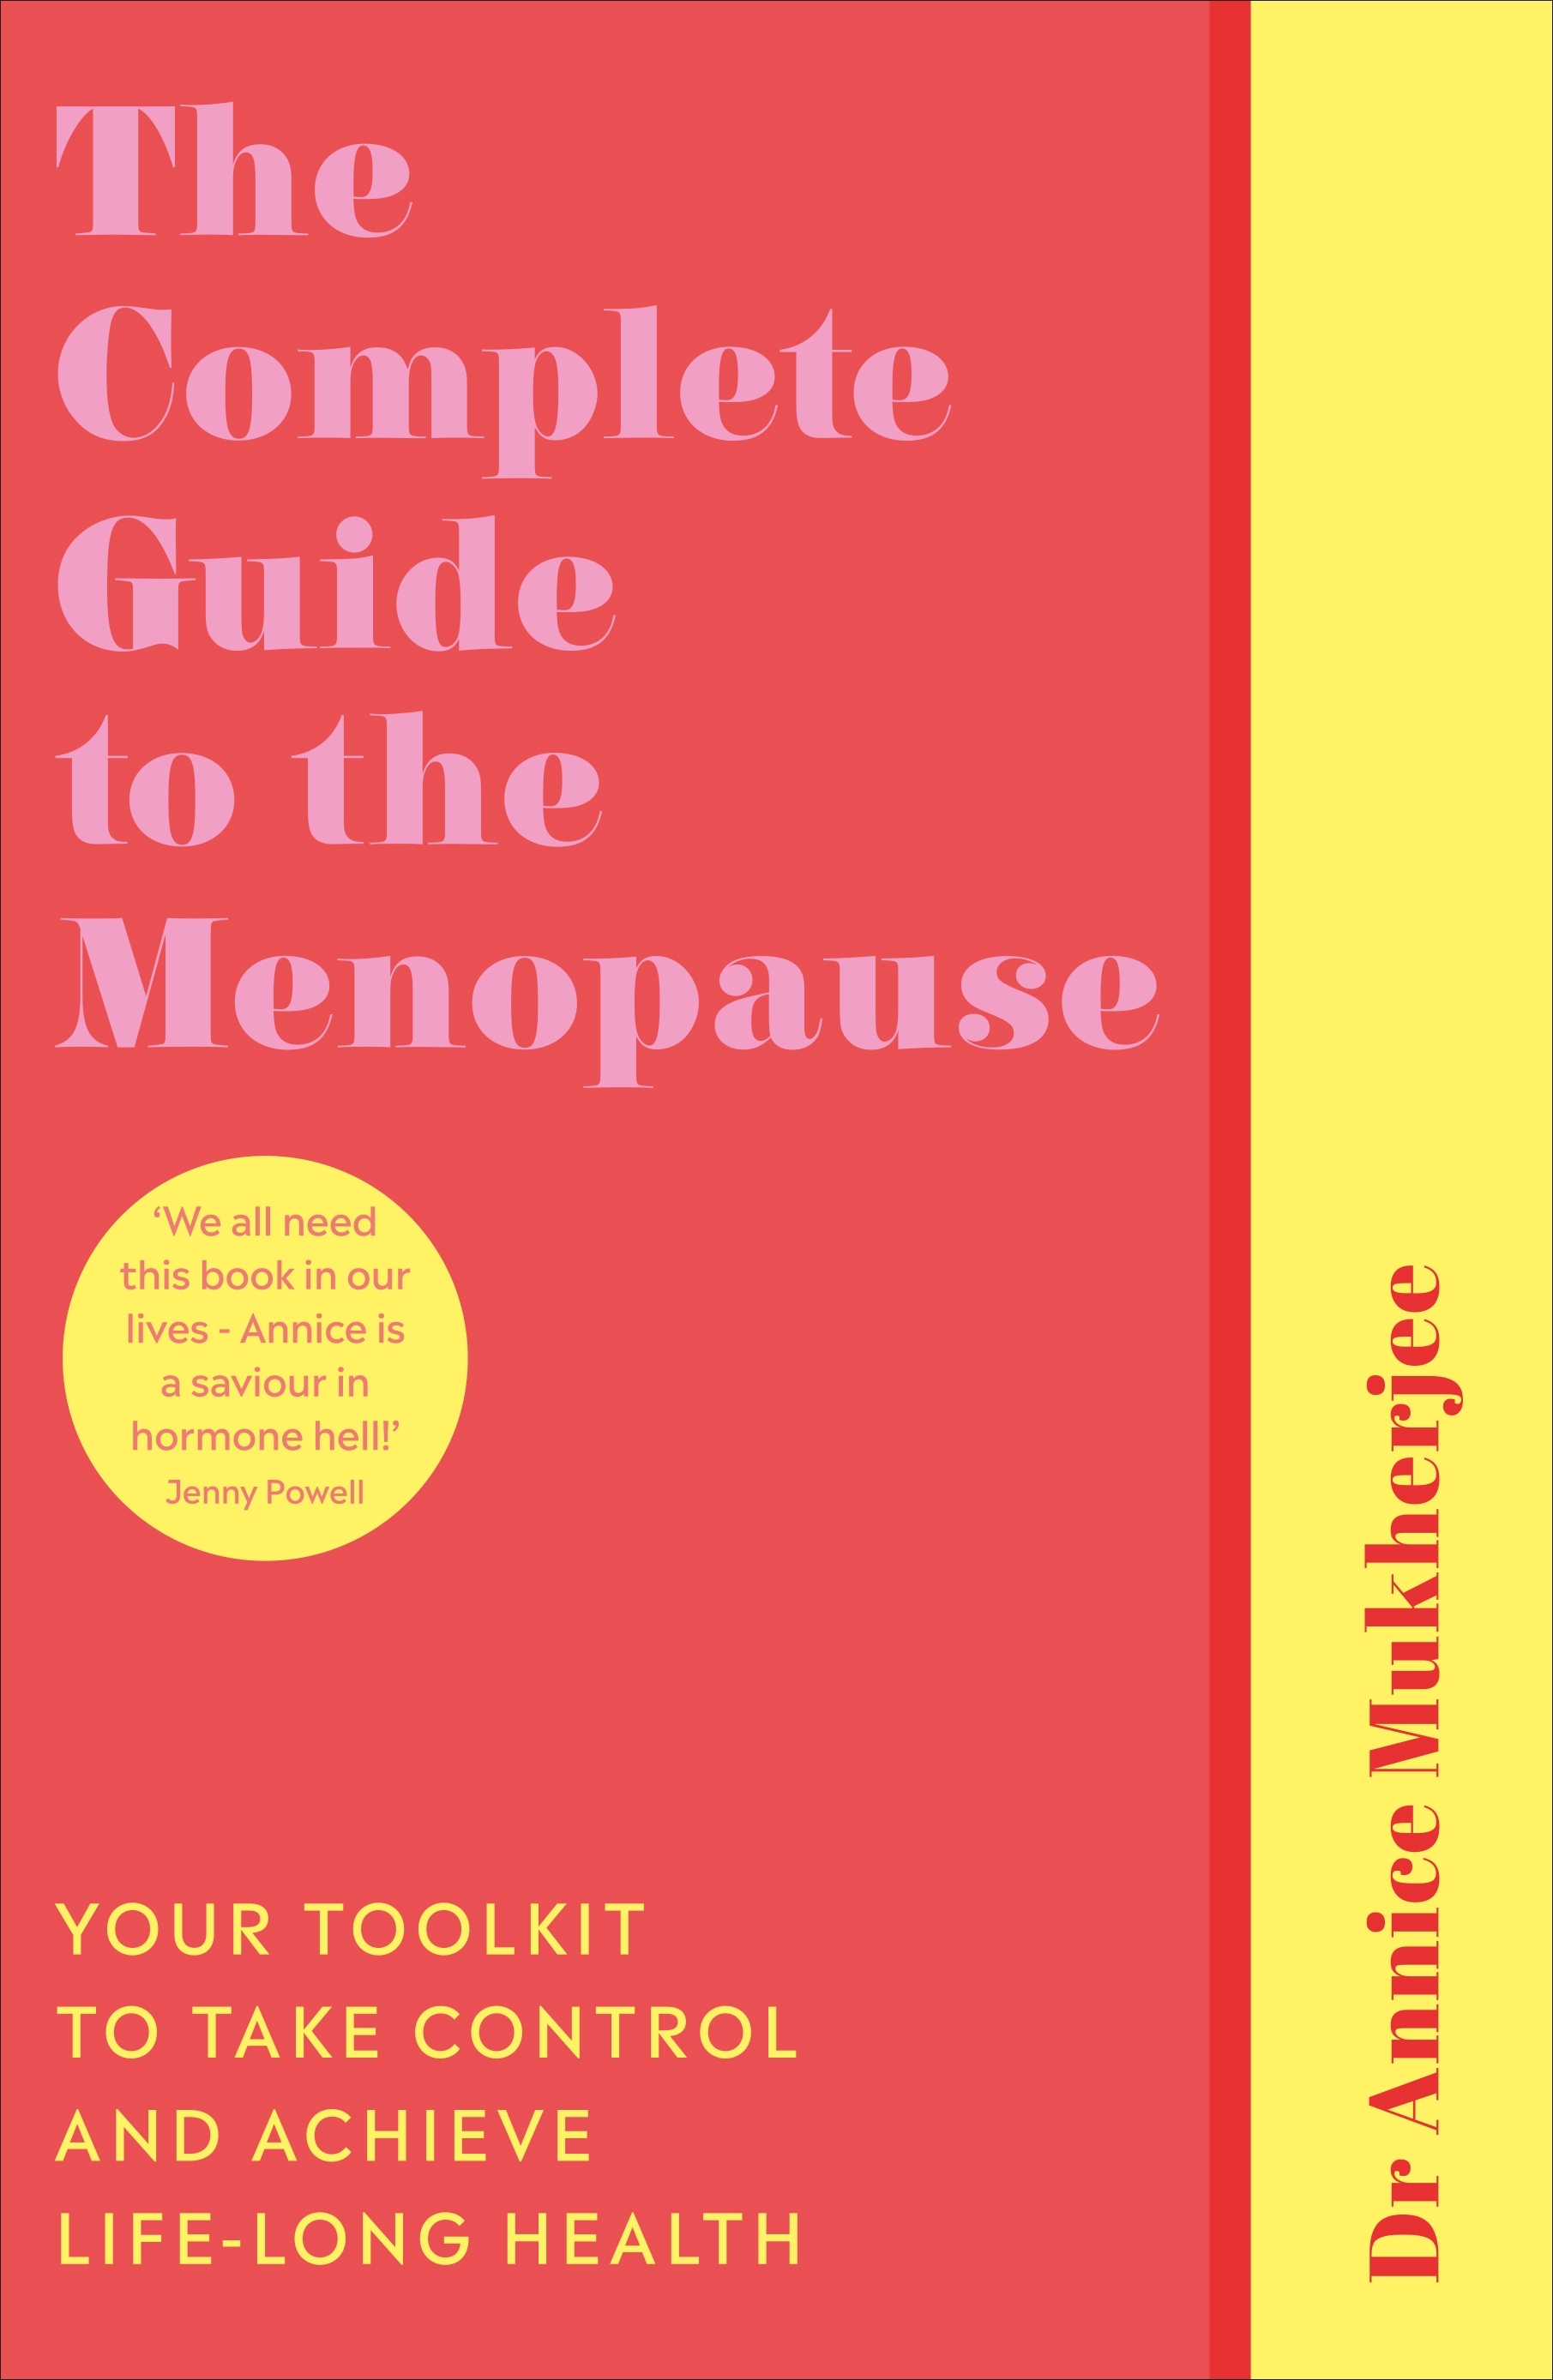 The Complete Guide To The Menopause By Annice Mukherjee Penguin Books Australia 1478